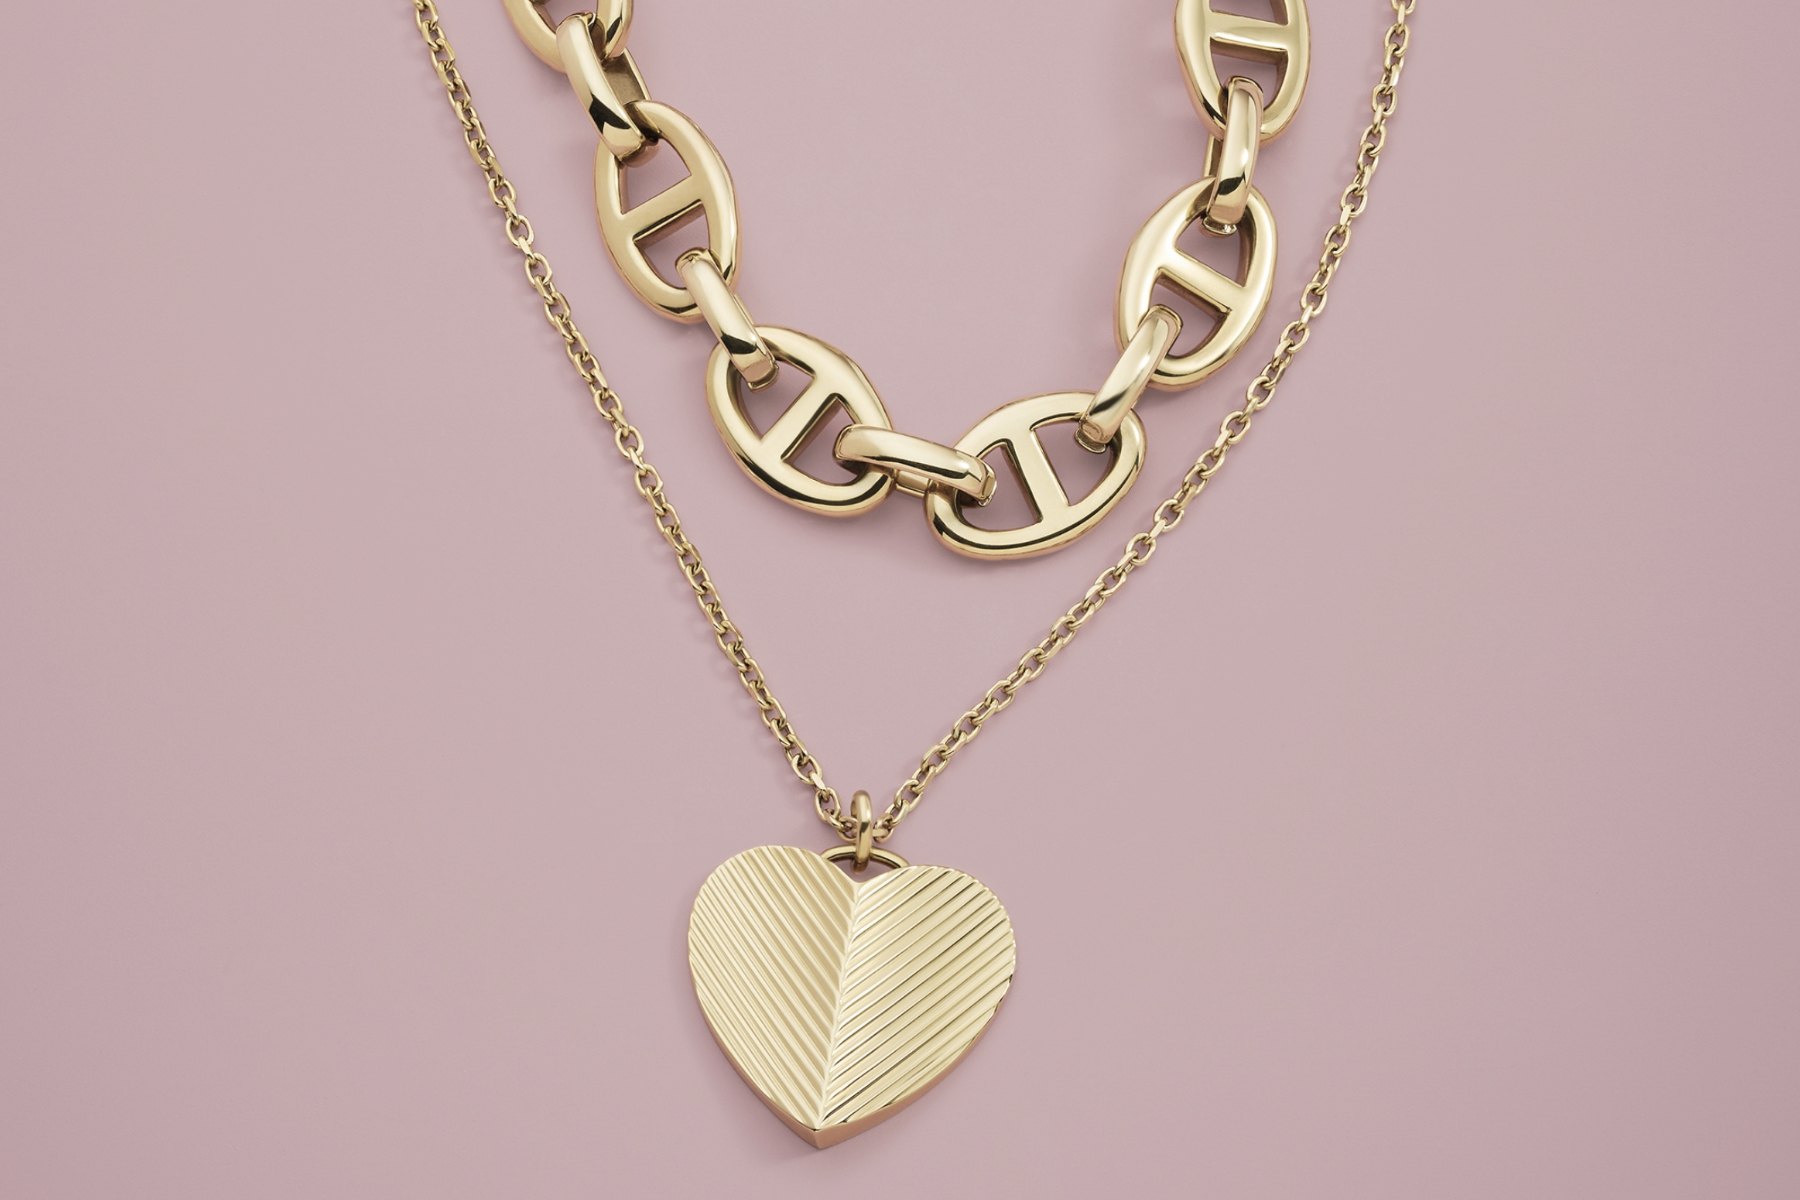 Harlow Heart Chain pink background